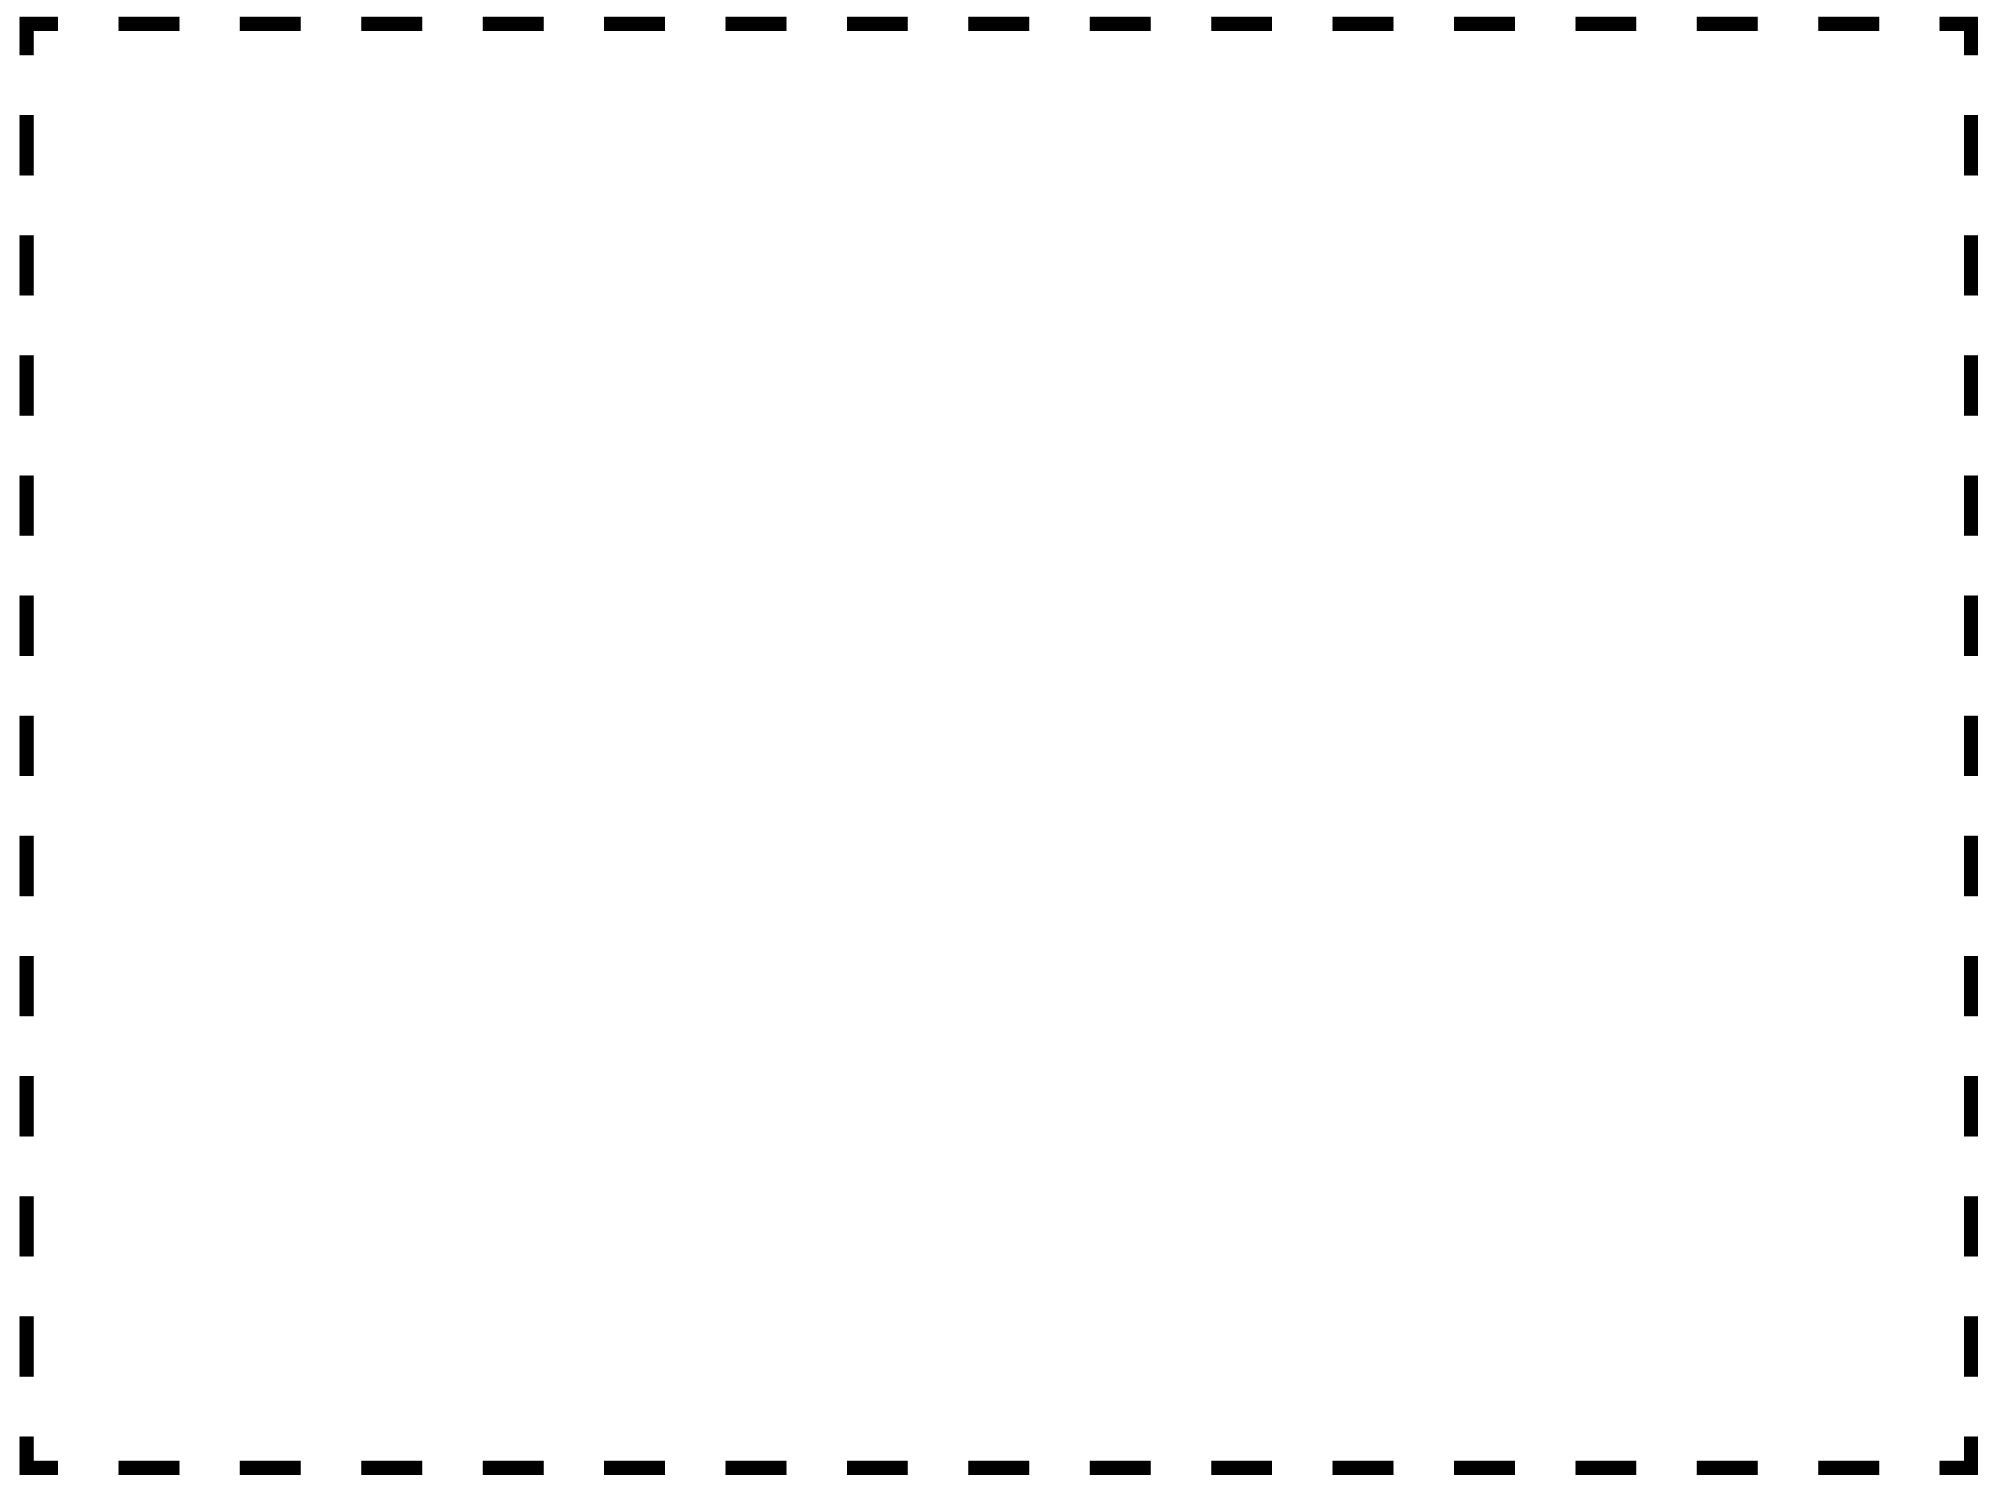 2298-coupon-outline-4x3-k.png